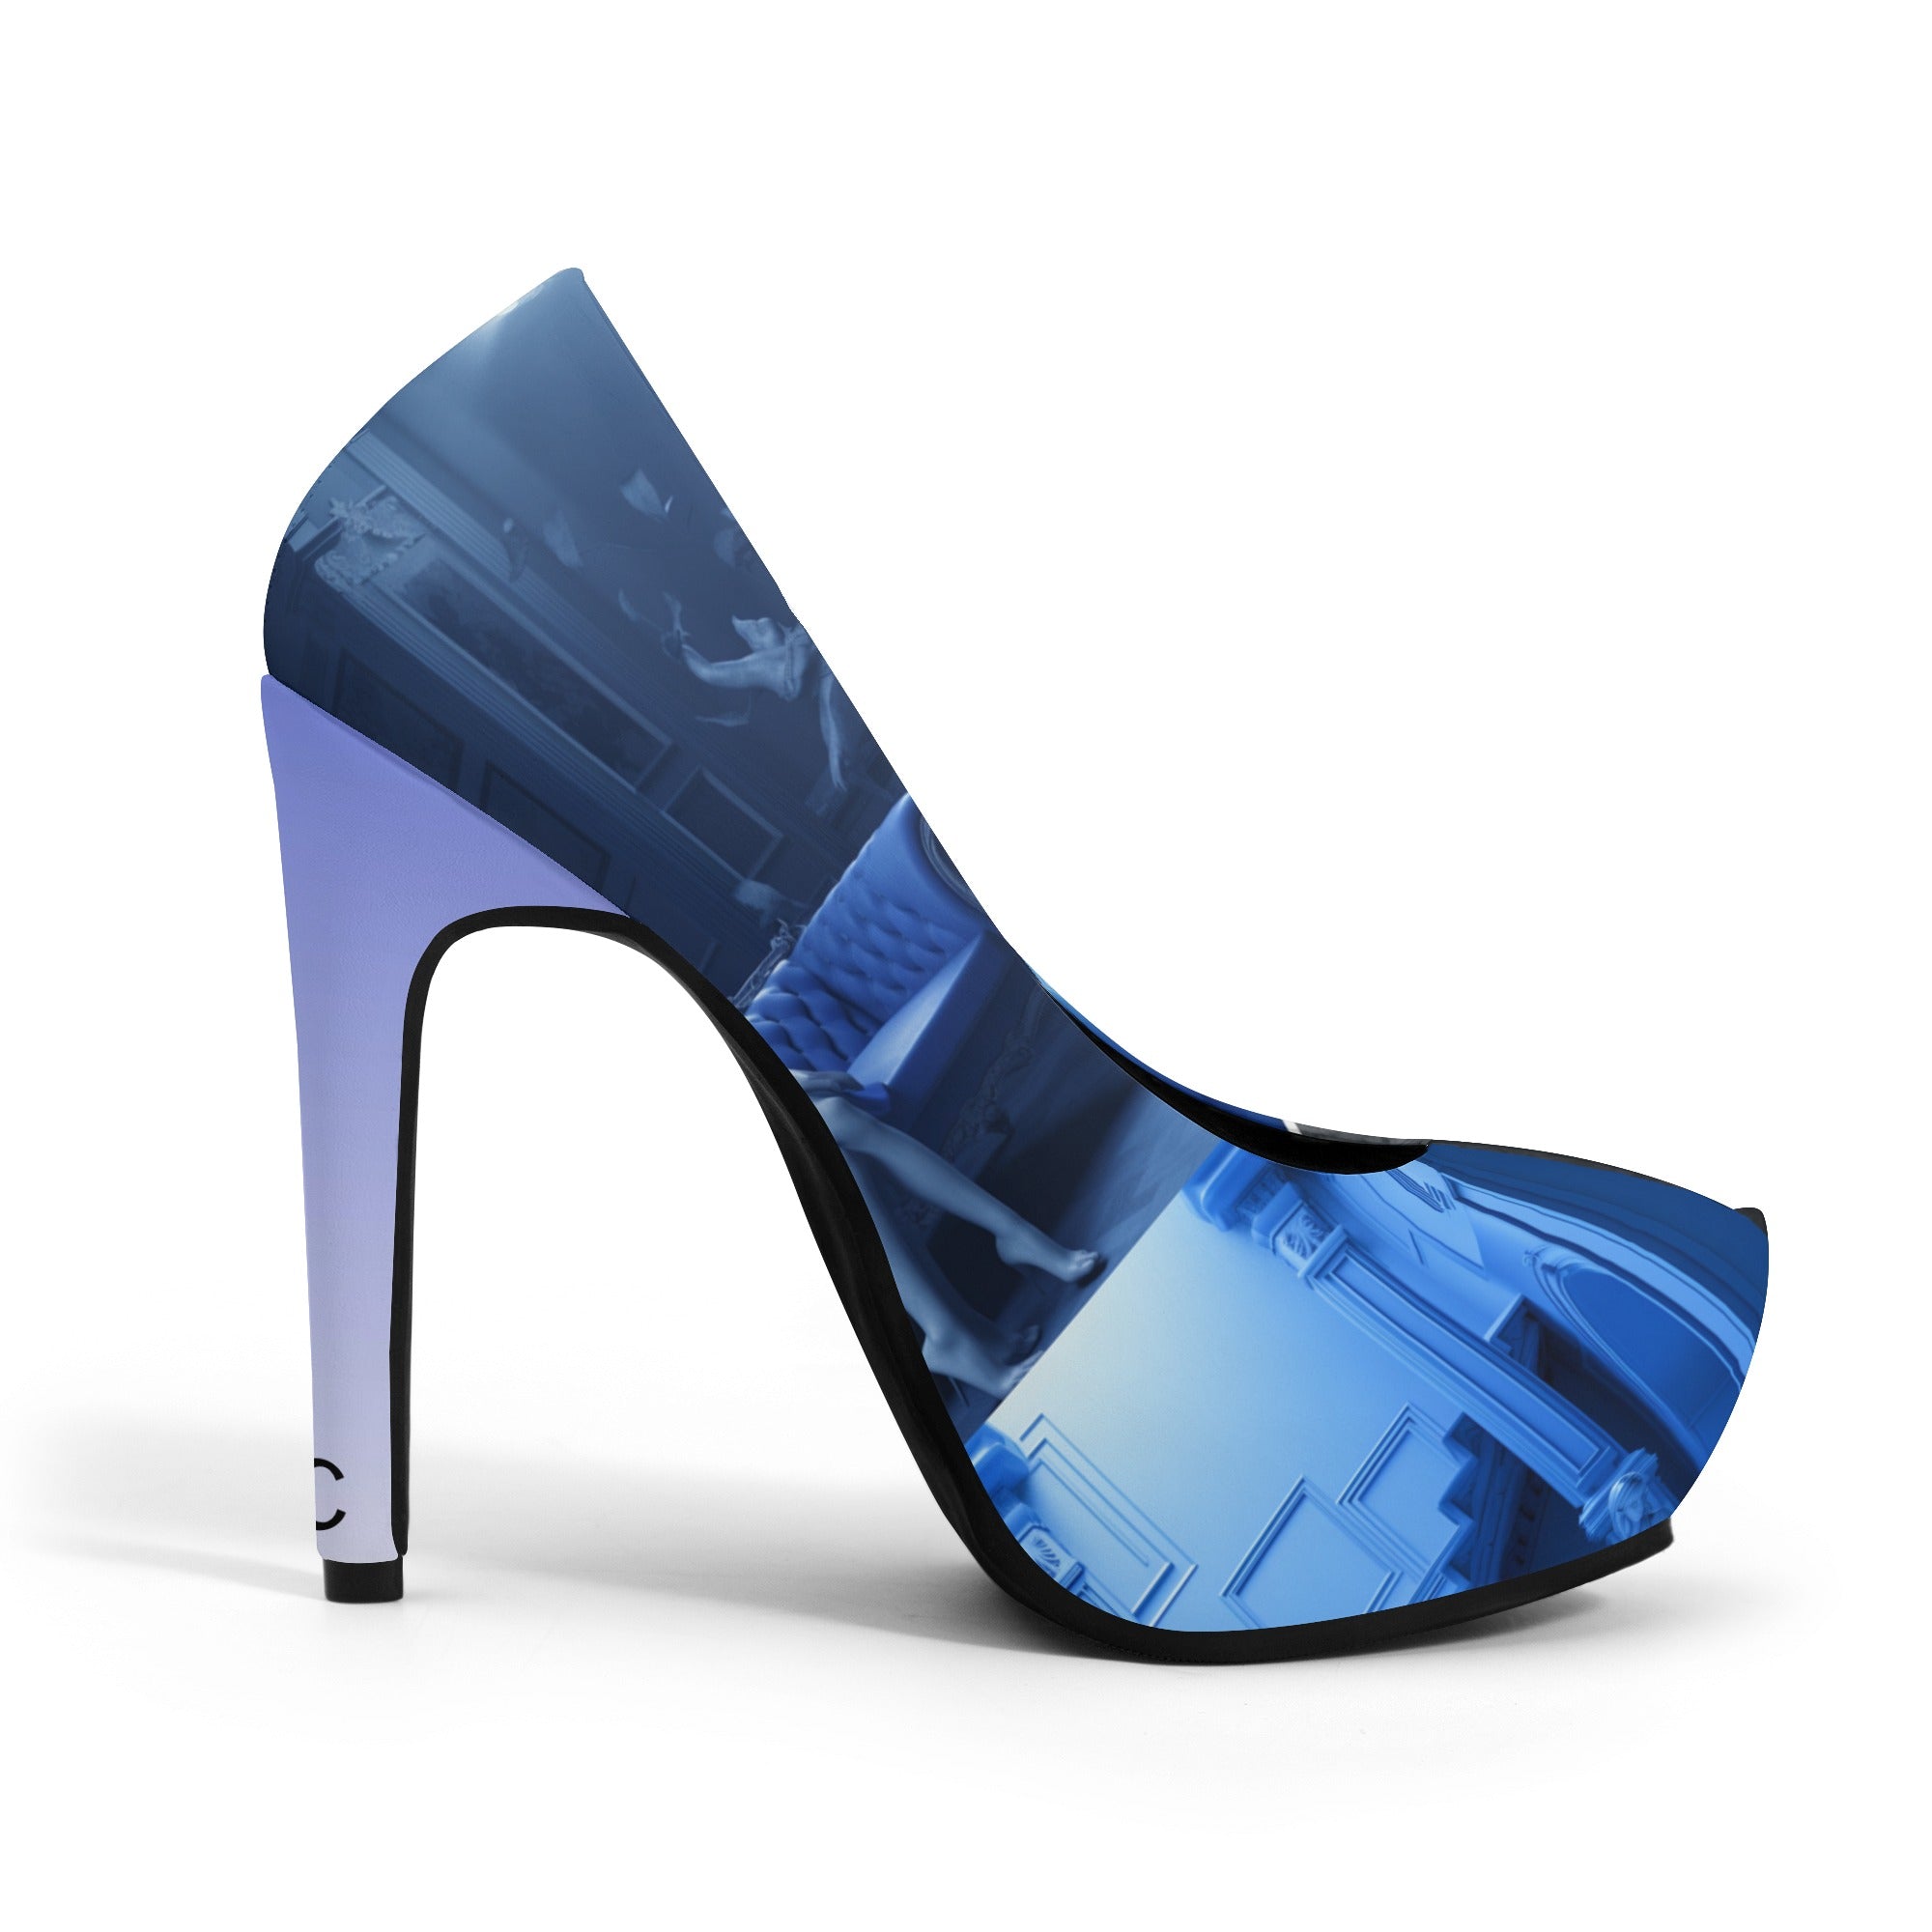 The Perfect Heel Height for Any Occasion - Michelle Phan – Michelle Phan